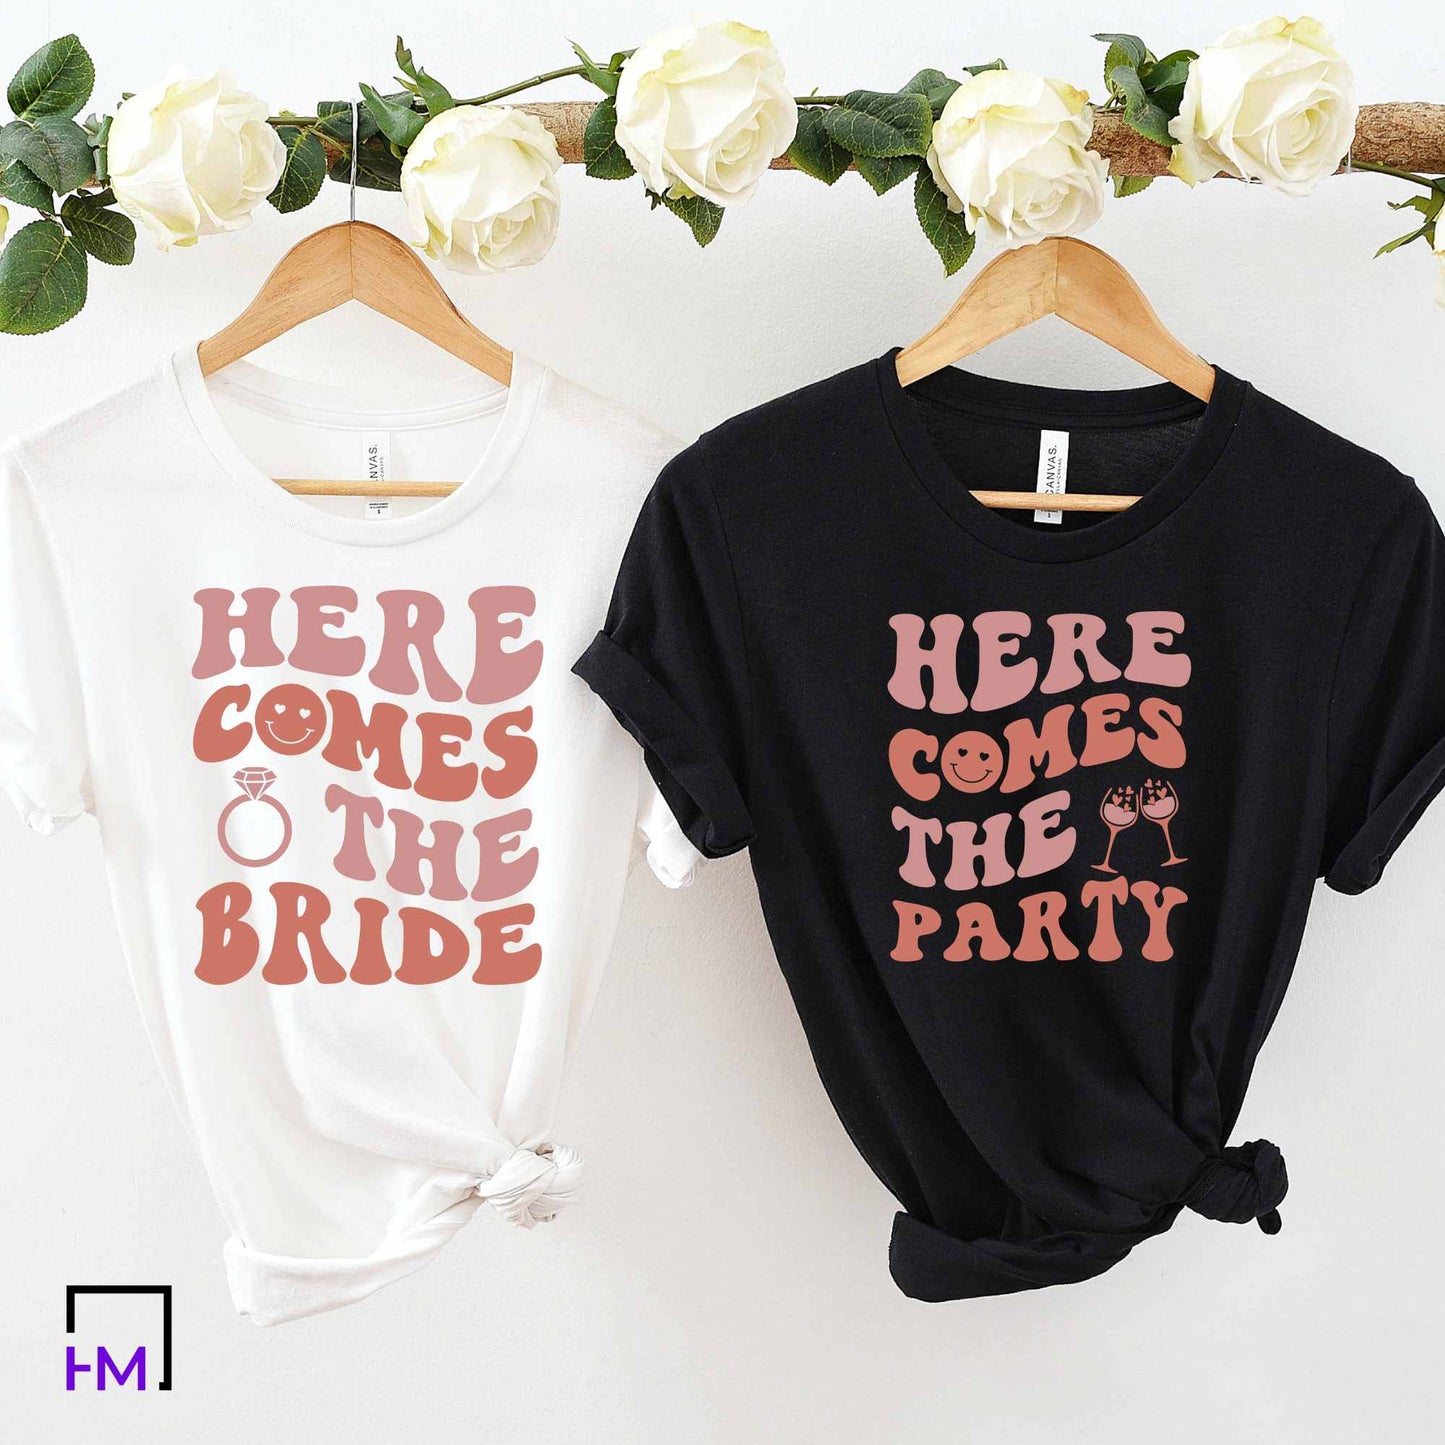 Here Comes the Bride, Here Comes the Party Shirts, Funny Bachelorette Party Shirts